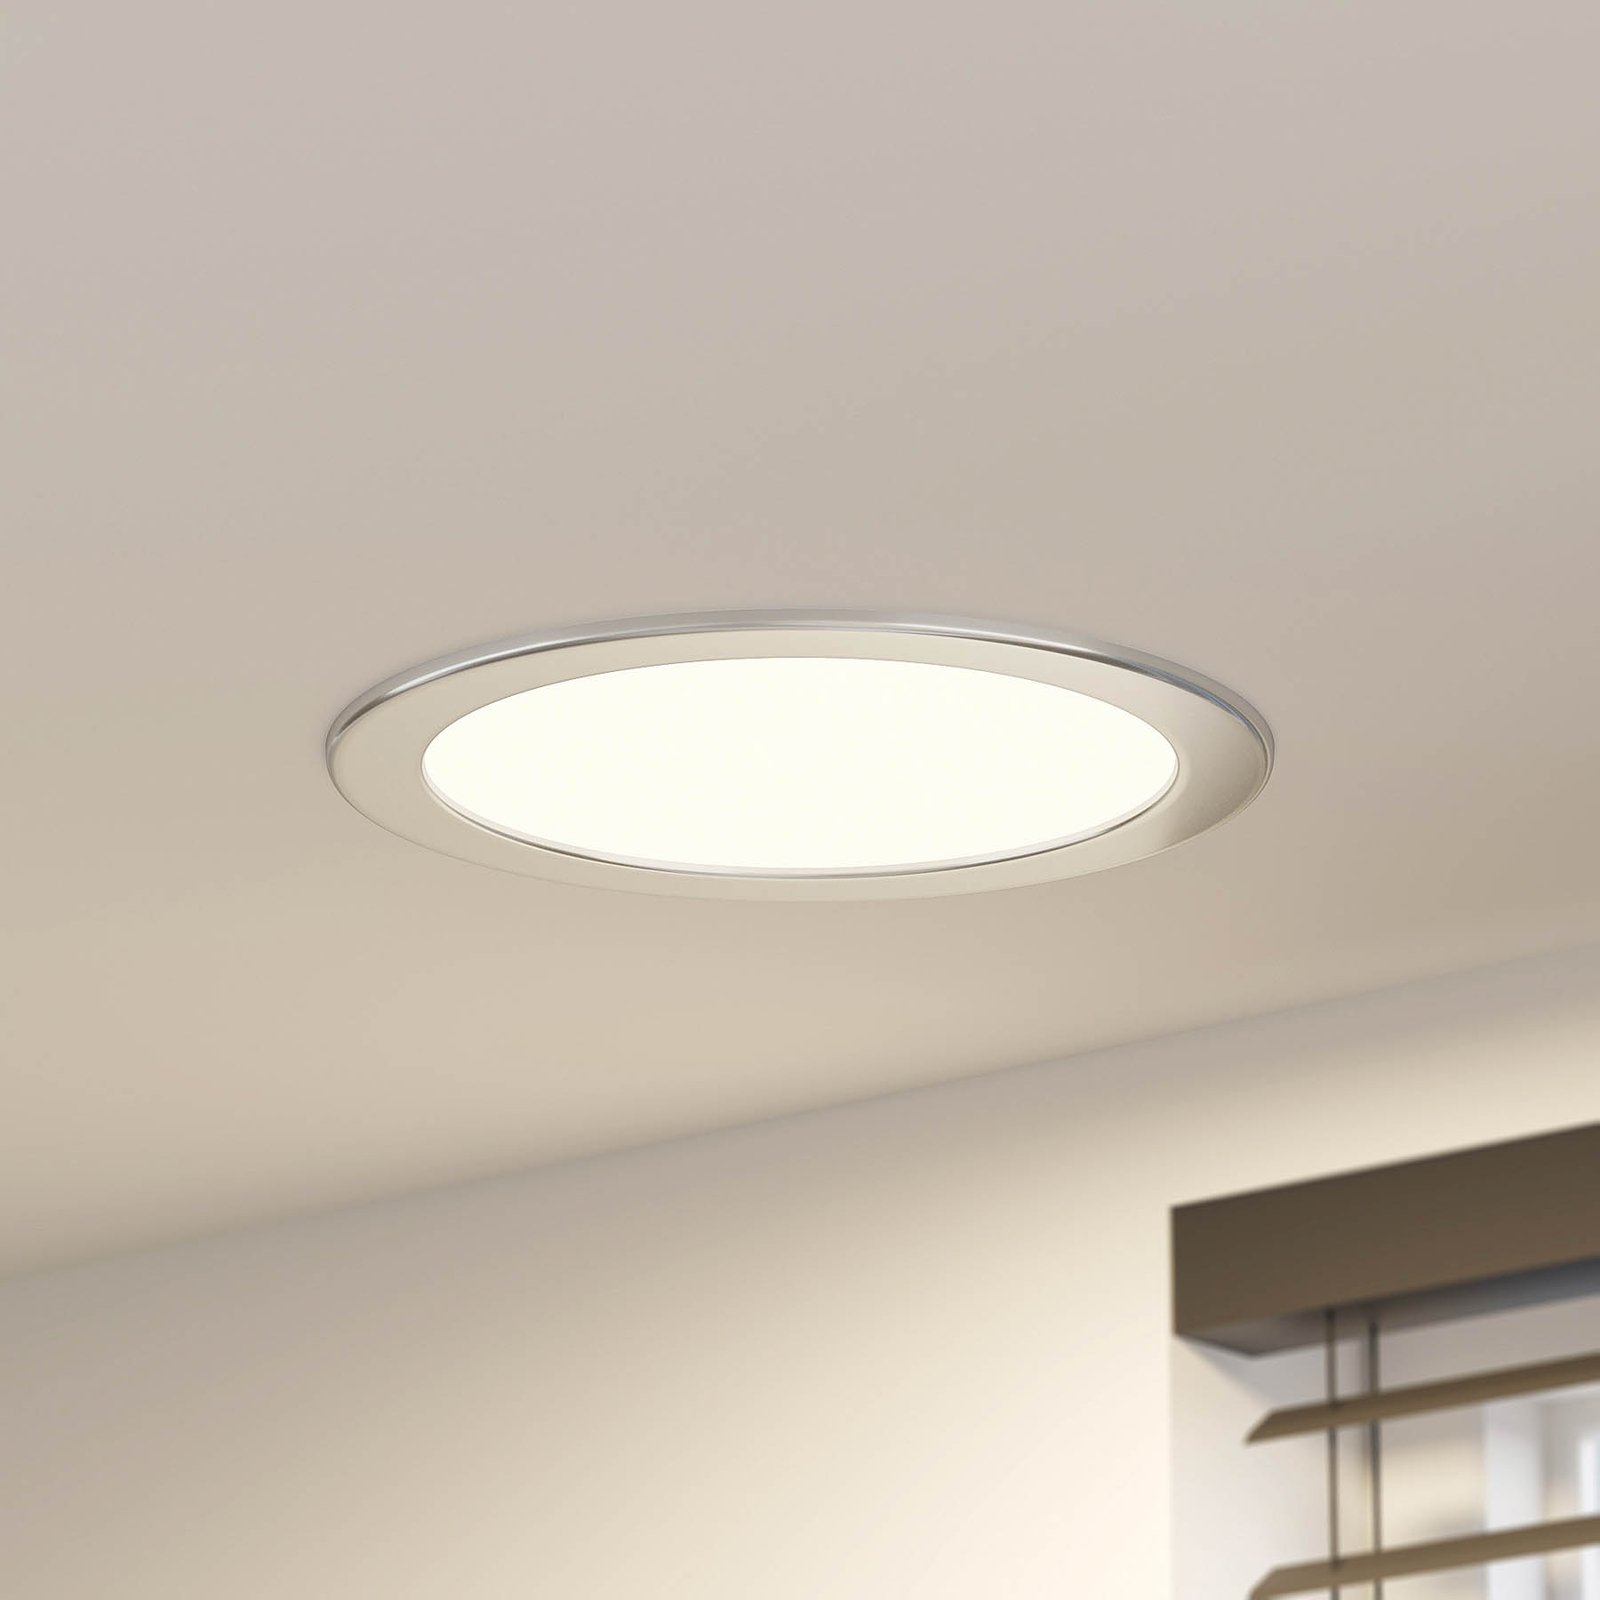 Prios LED recessed light Cadance, silver, 24 cm, dimmable